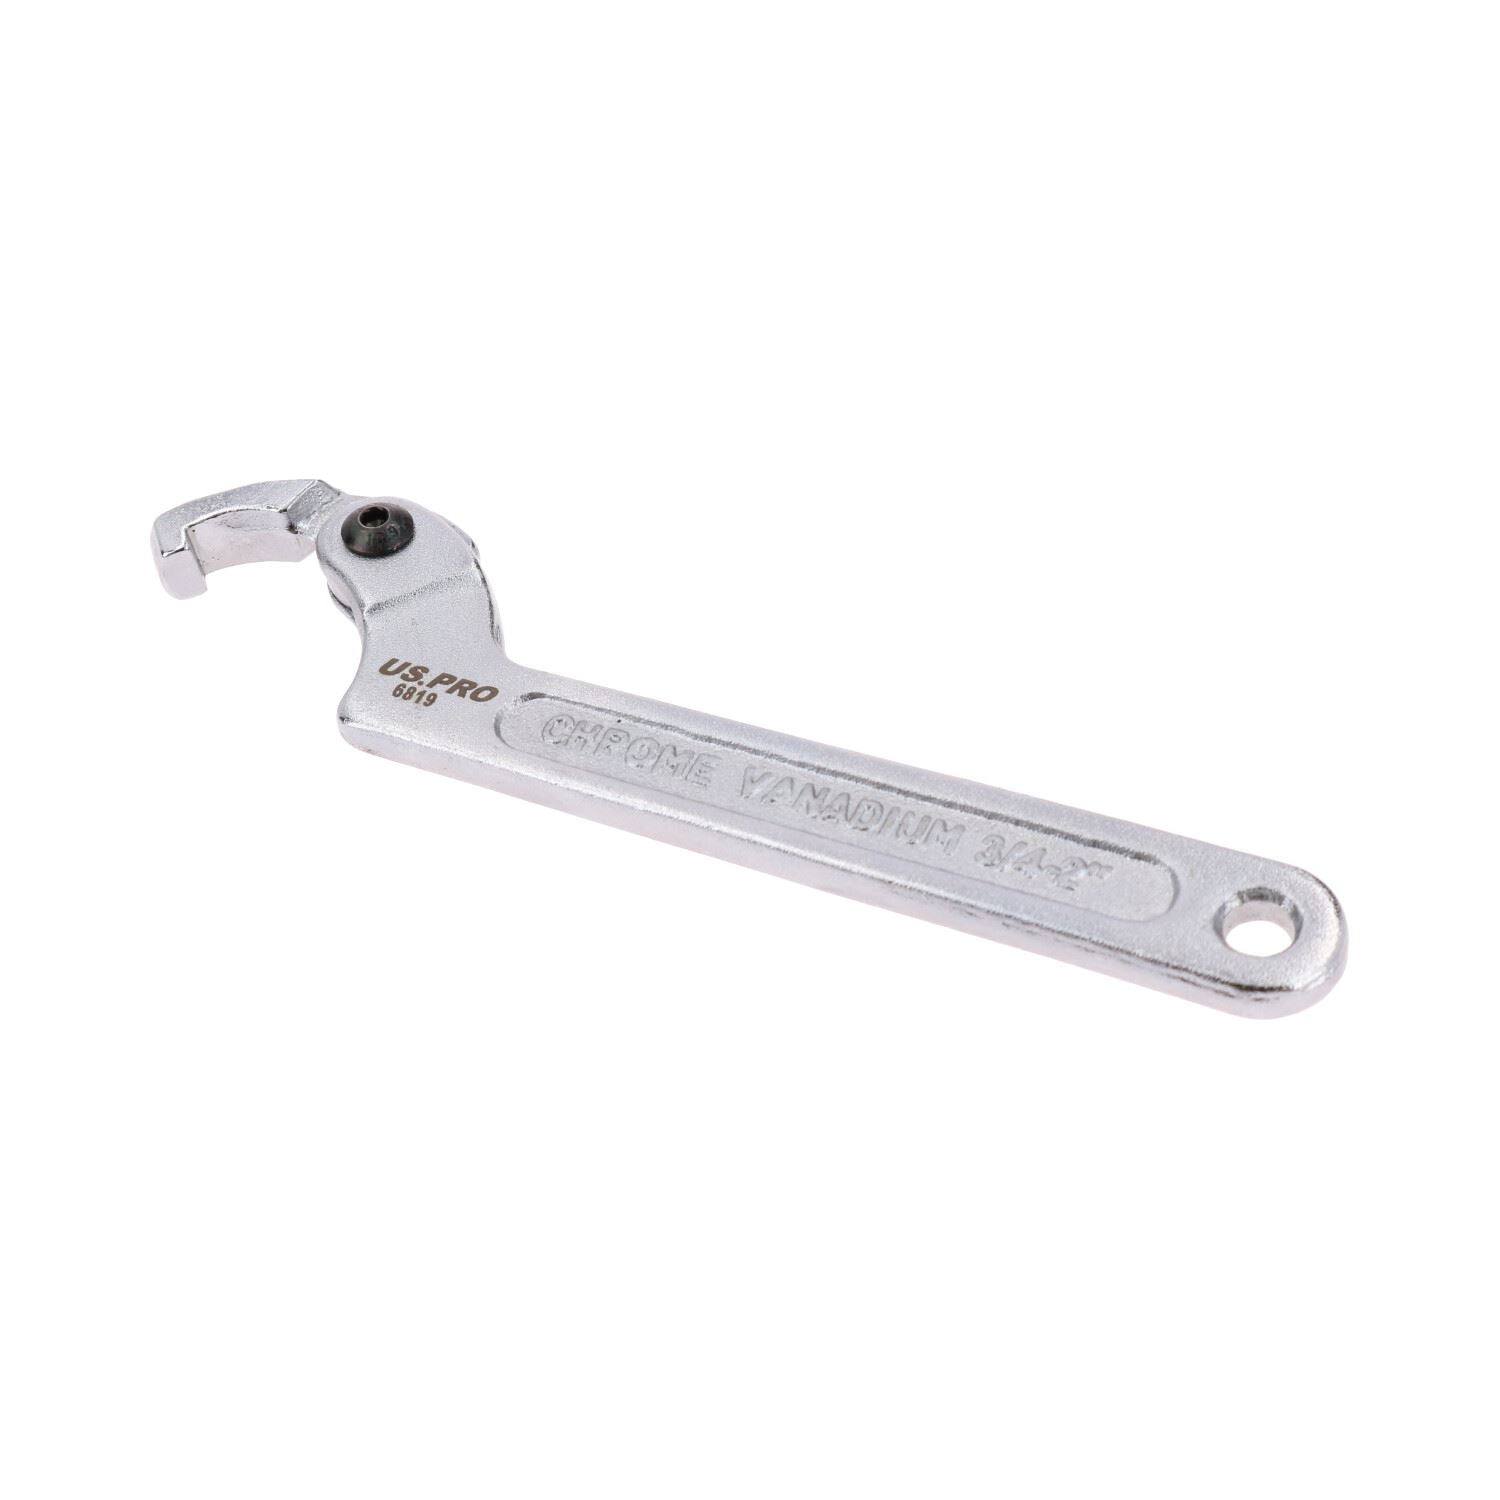 Adjustable Hook Wrench C Spanner 19mm – 50mm For Slotted Retaining Rings